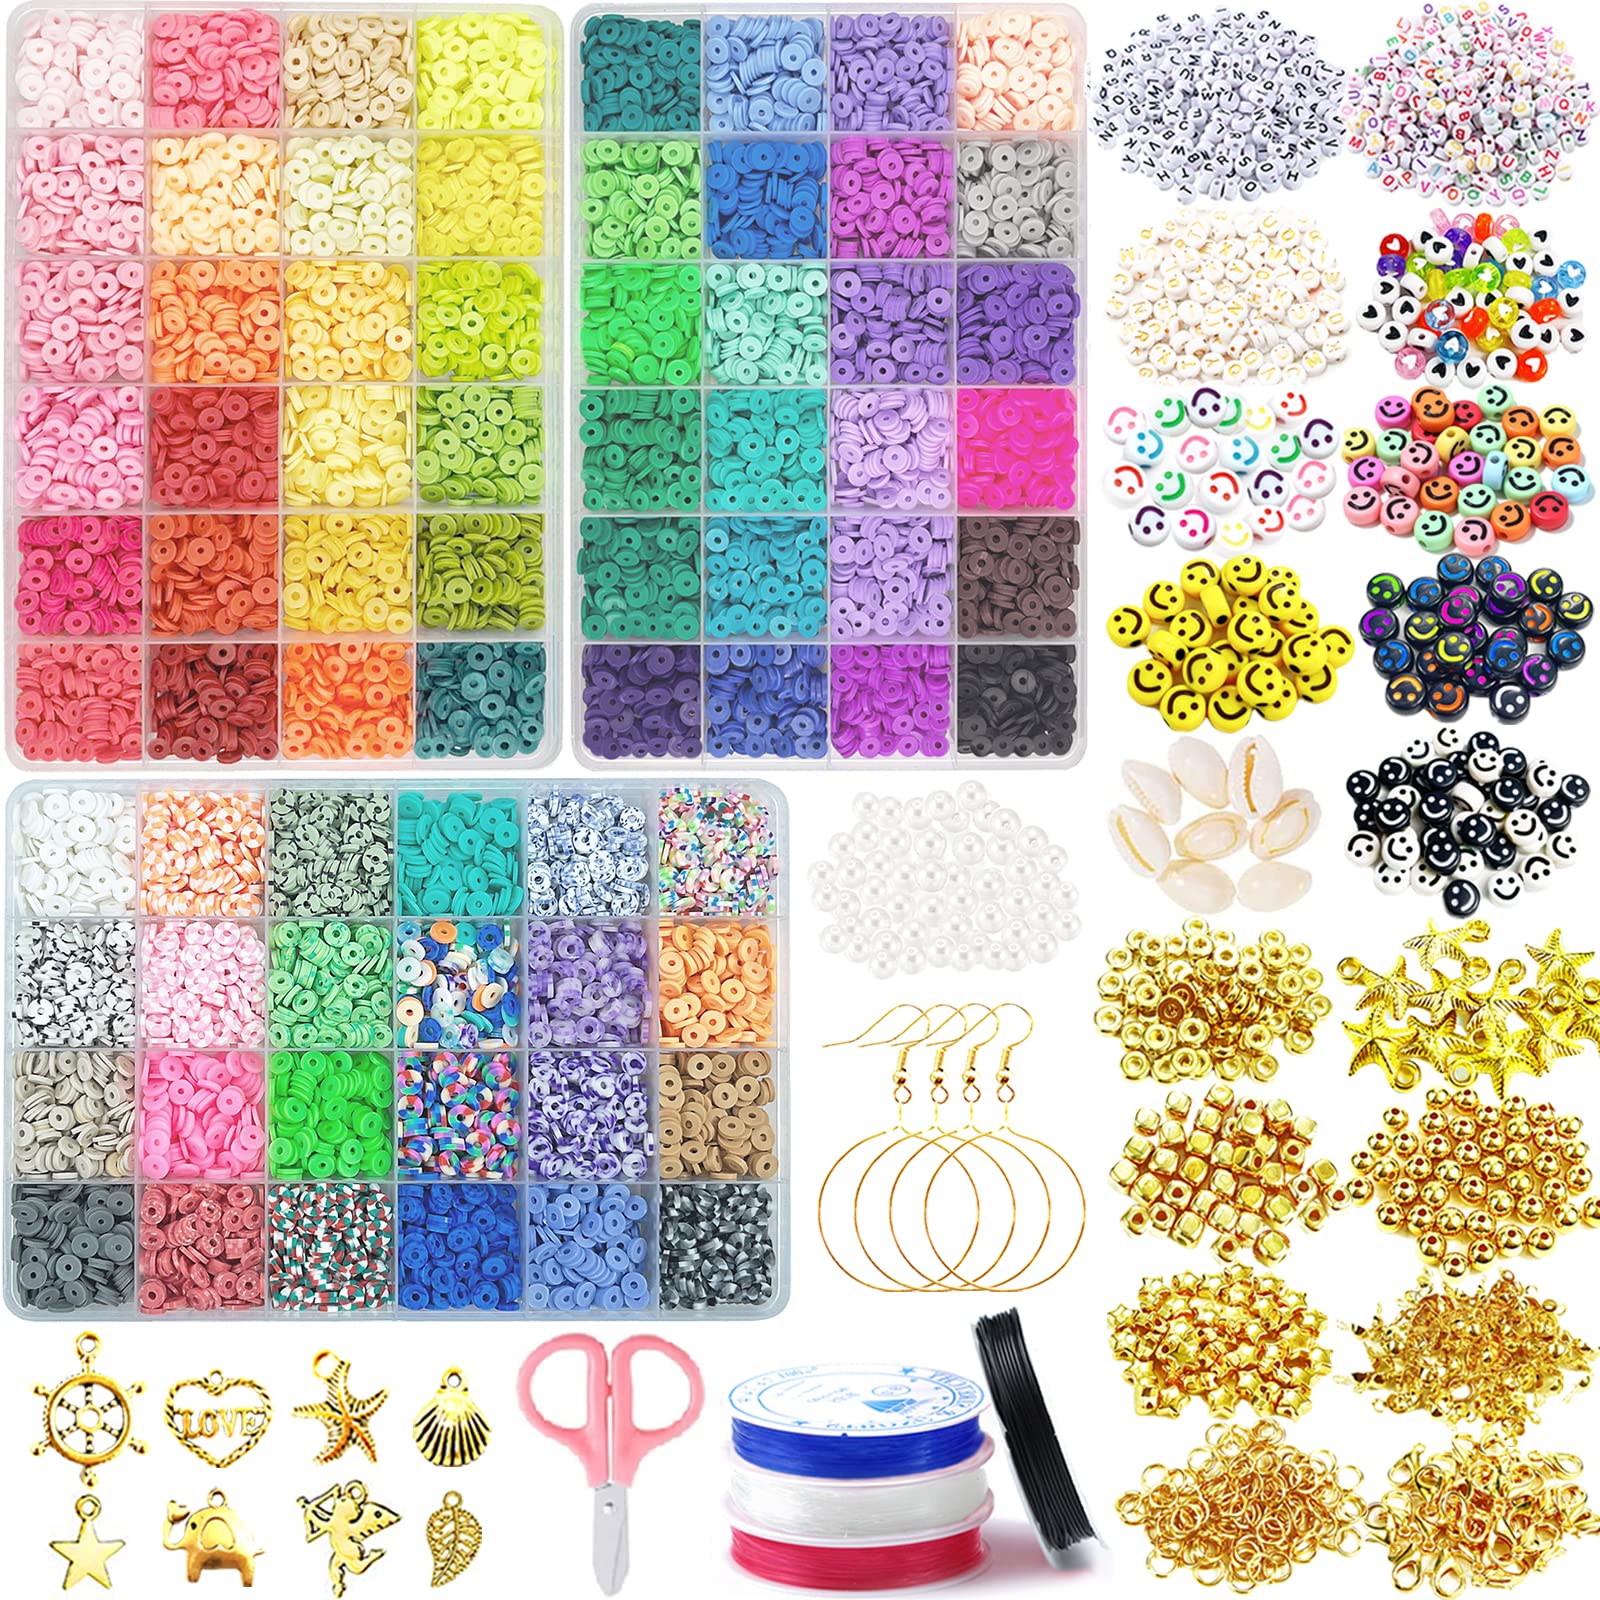 pmbqifay 72 colors clay Beads for Bracelets Making, 12460pcs clay Bead Kit,  Polymer clay Beads Heishi Beads Flat Beads for DIY Bracelets